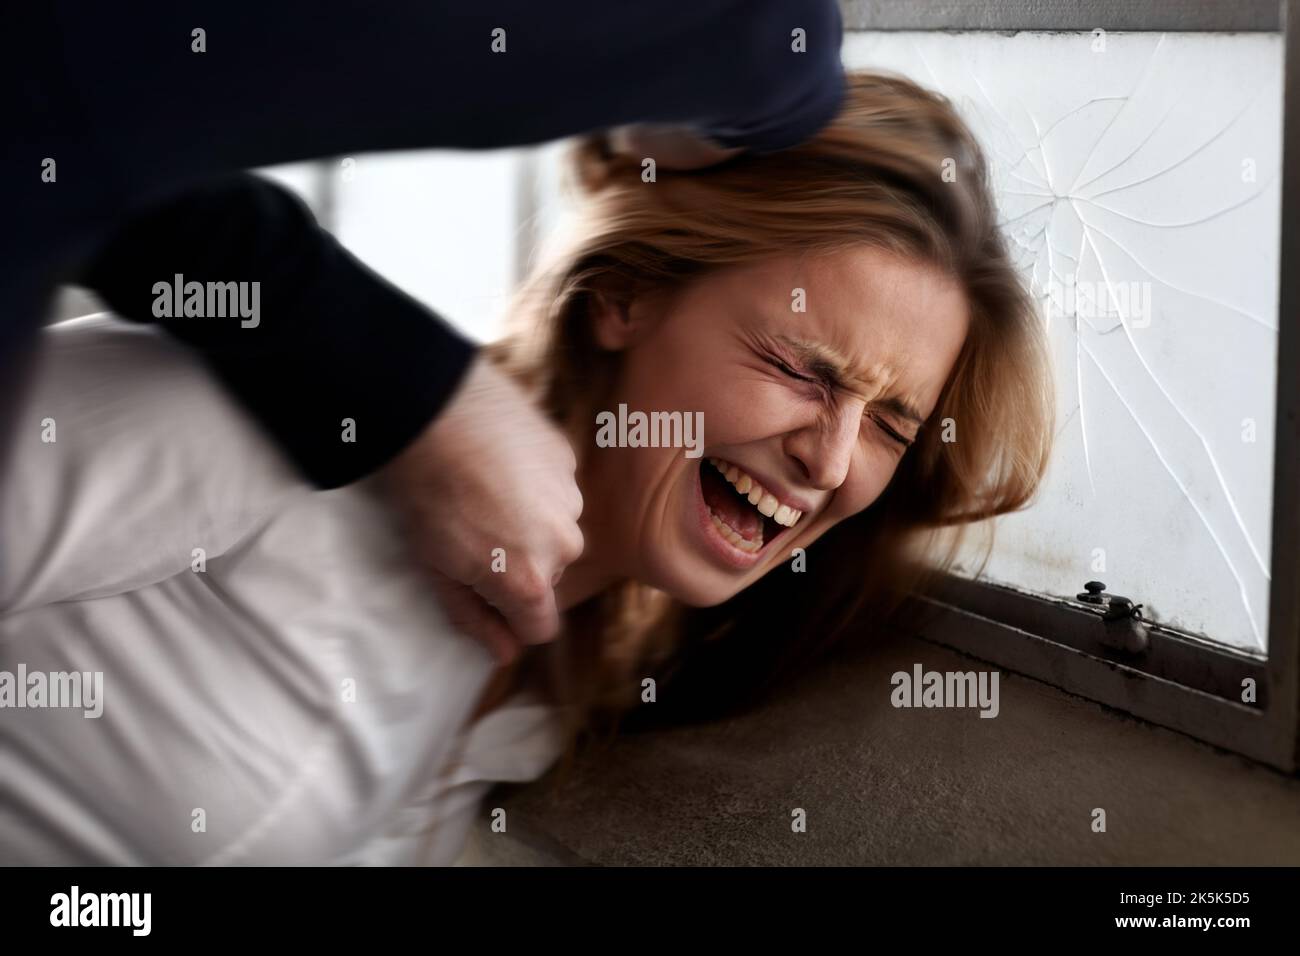 Act of violence. Abused young woman with her head being smashed against a window by an attacker. Stock Photo